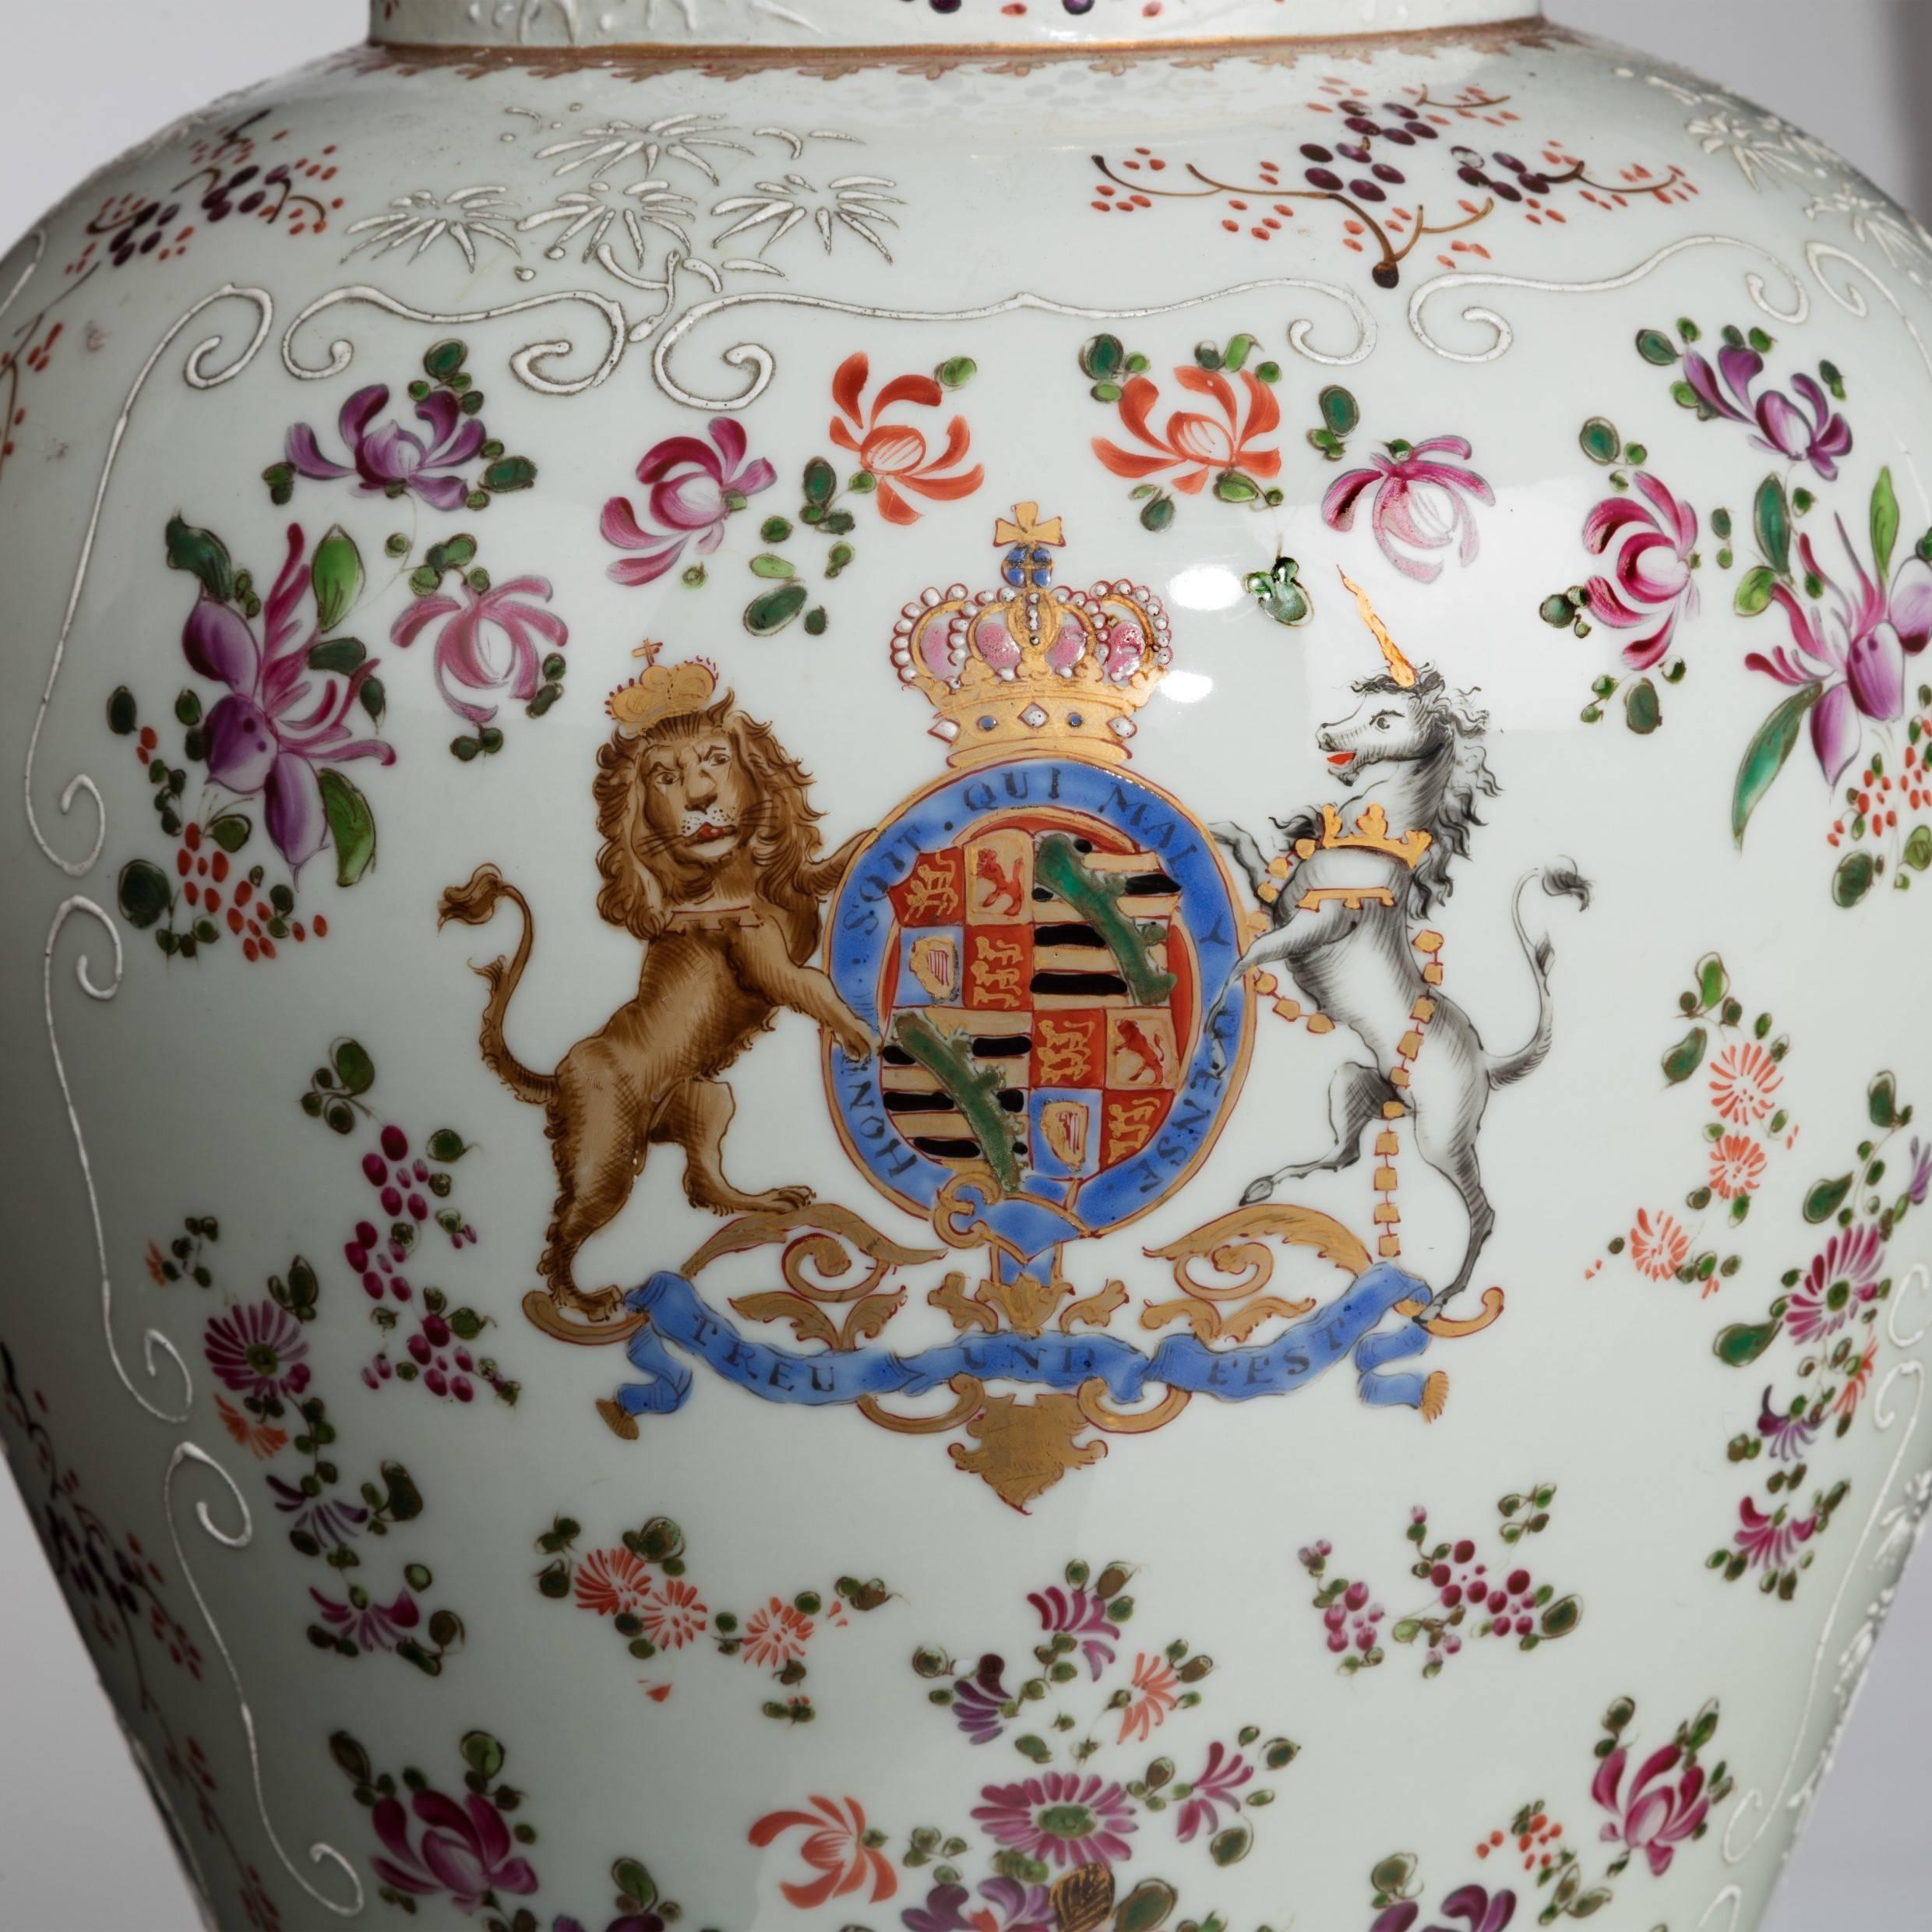 A pair of Continental white porcelain vases with royal coats of arms, converted into lamps.